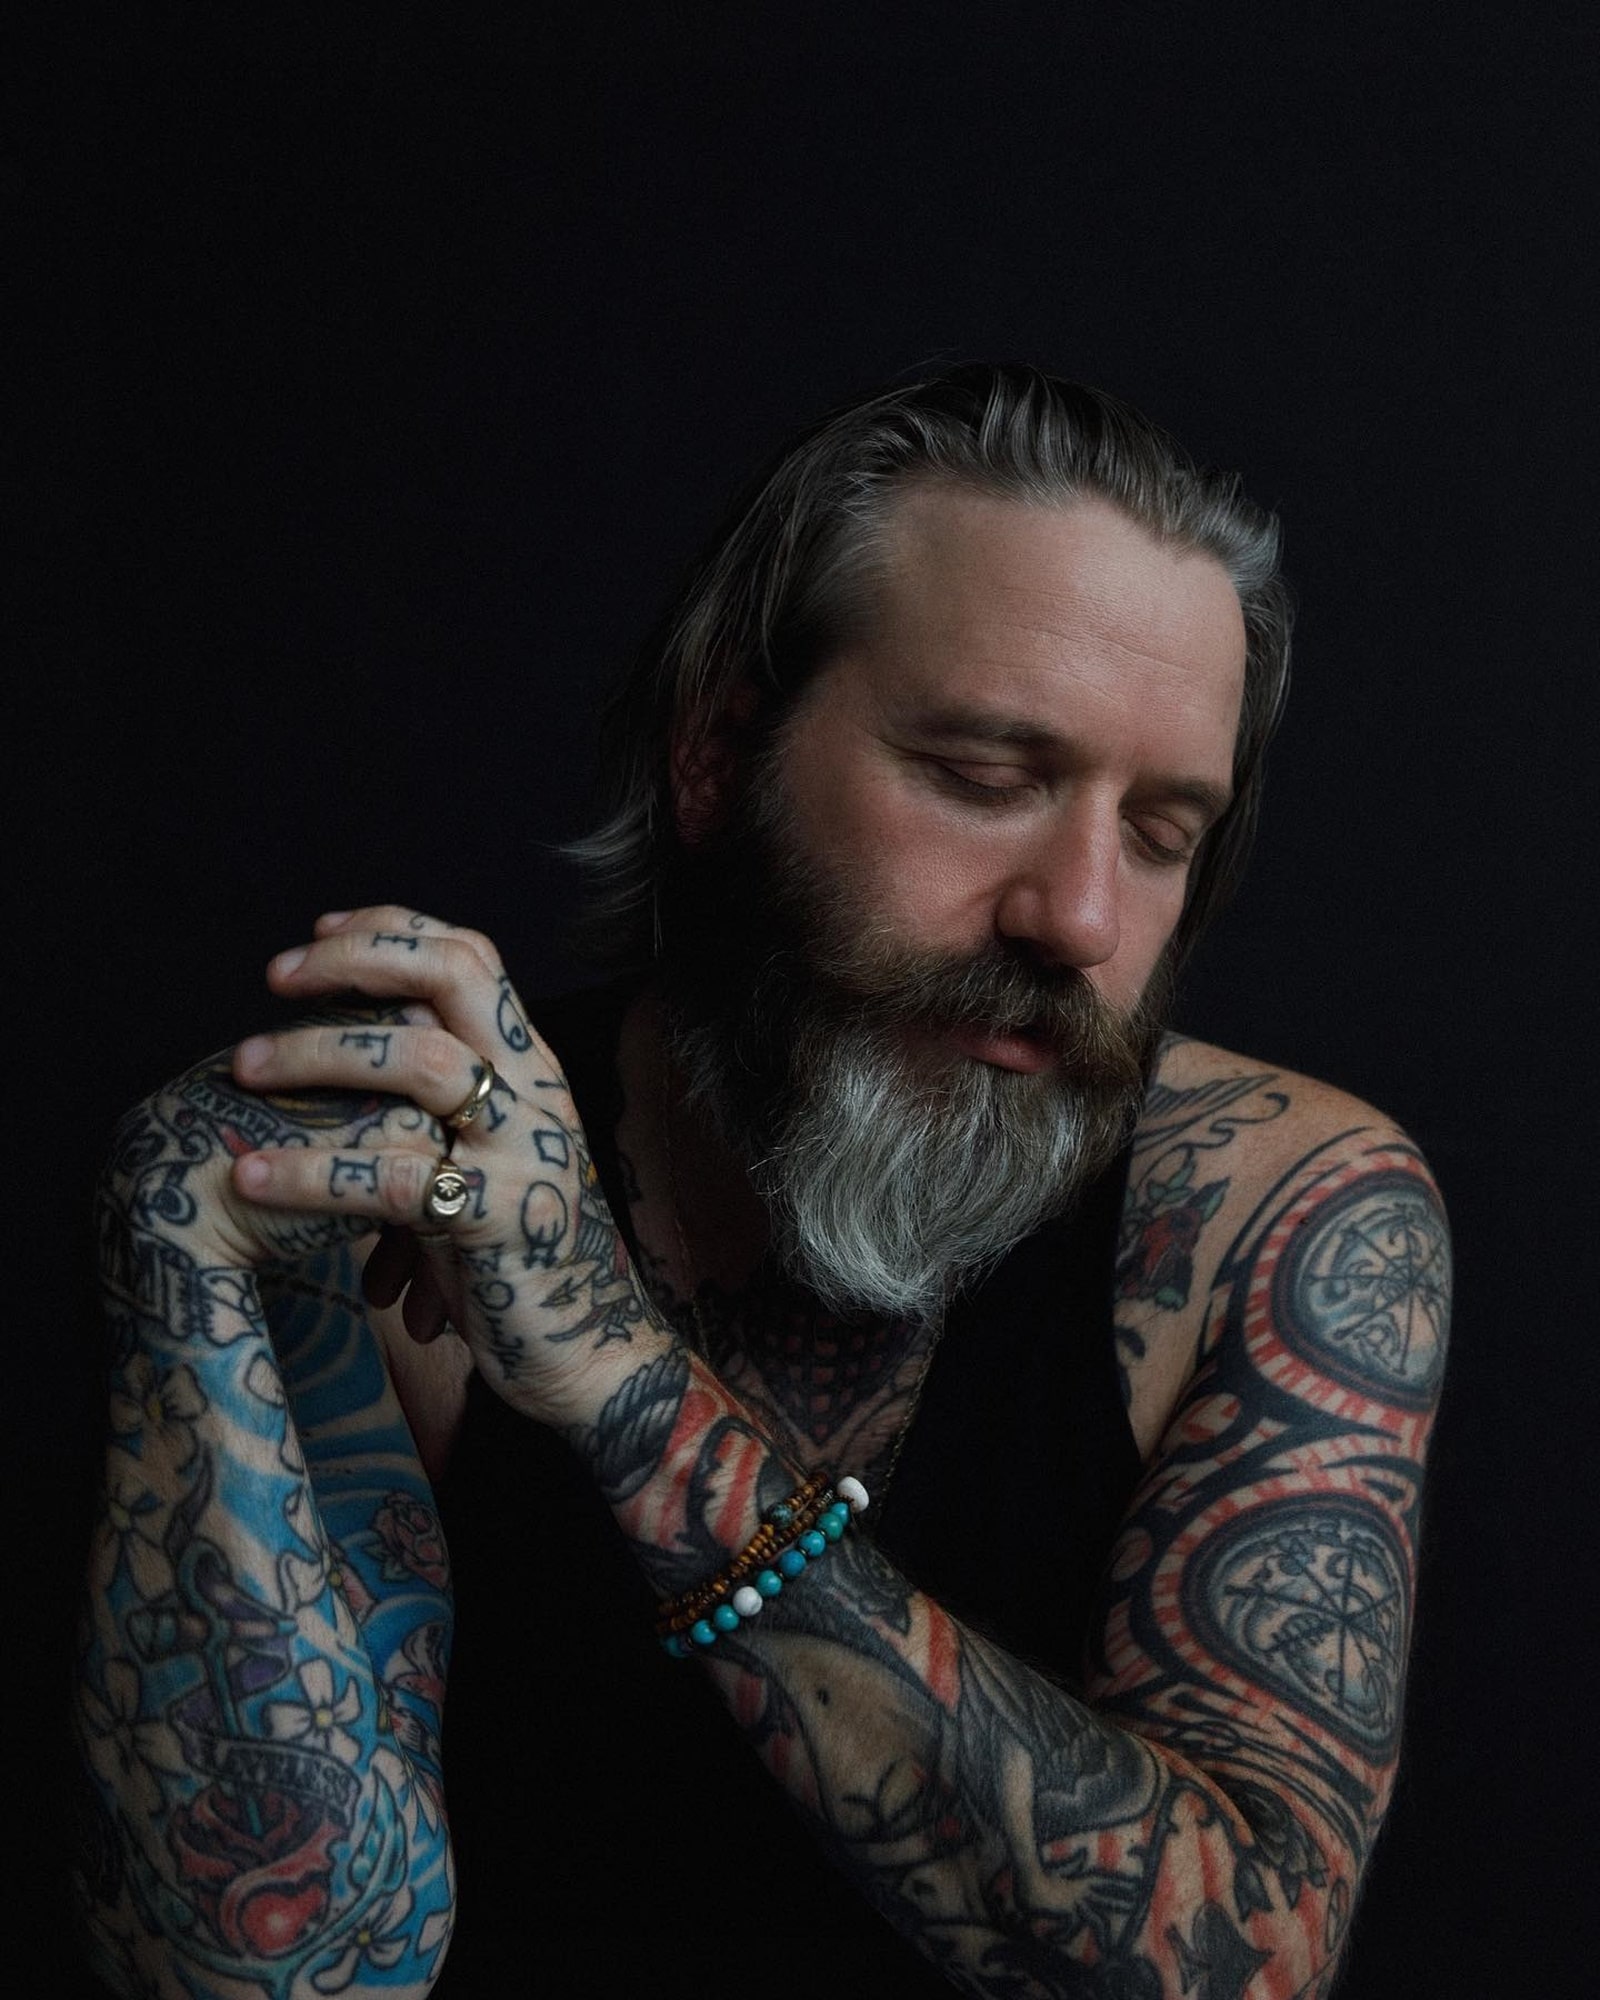 Dallas Green - City And Colour, by @vanessaheins